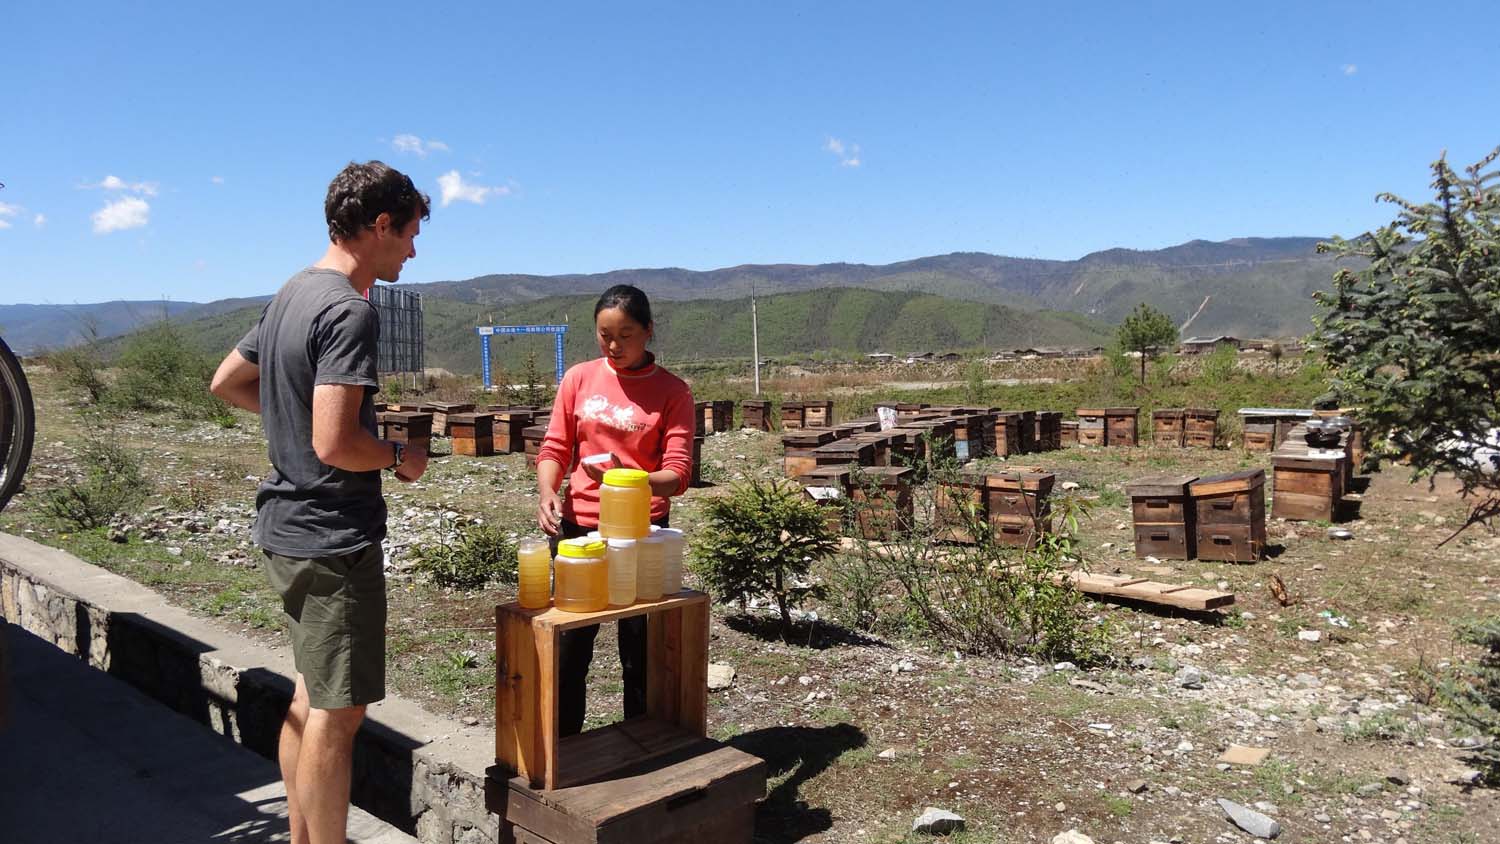 buying honey directly from the beekeepers alongside the road